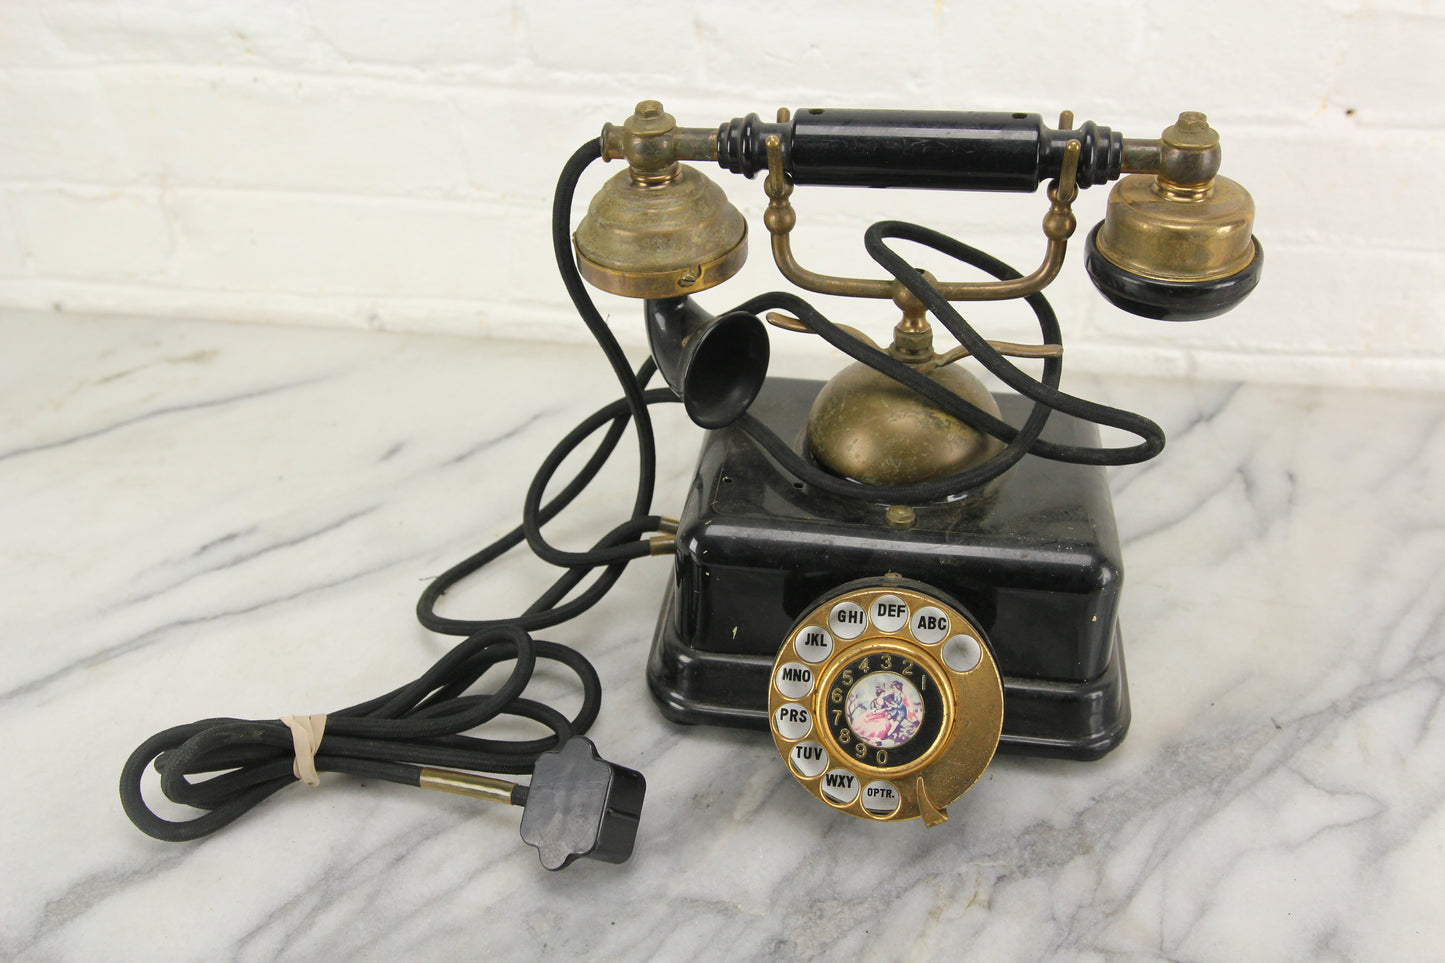 Antique Telephone Vintage Phone Disk Phone French Victorian Style